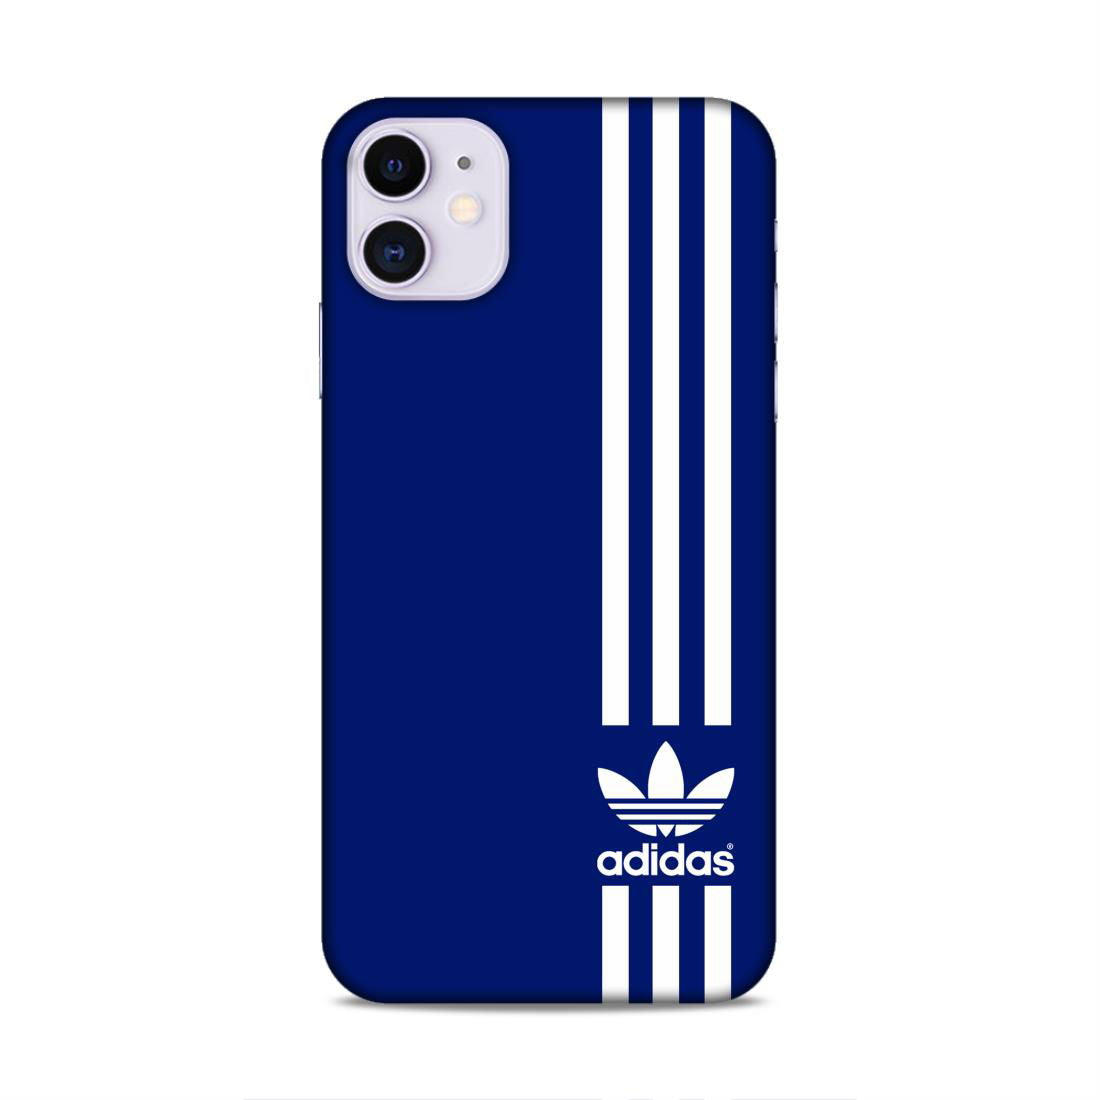 Adidas in Blue Hard Back Case For Apple iPhone 11 - Right Marc